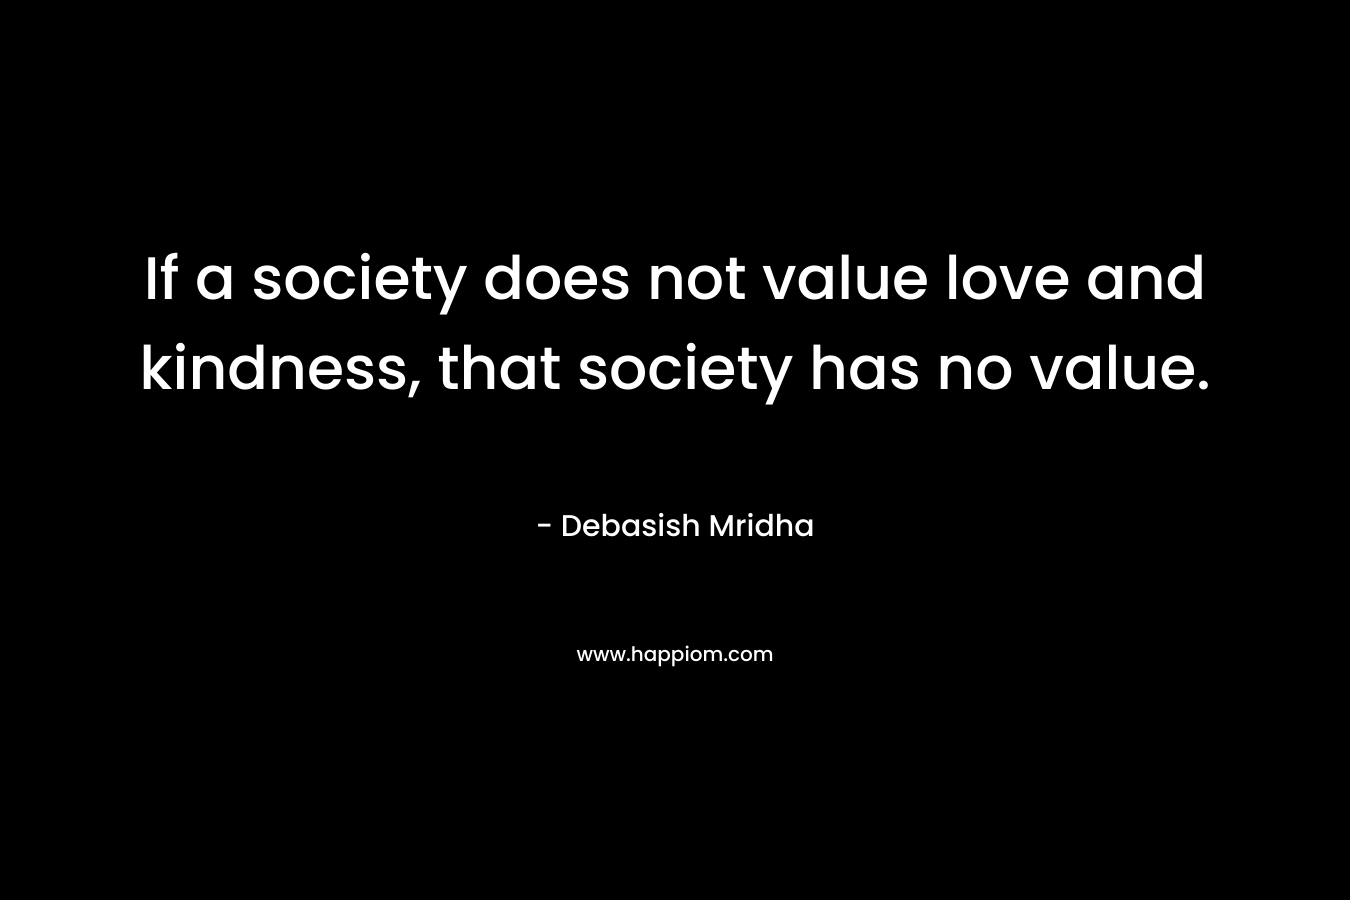 If a society does not value love and kindness, that society has no value.